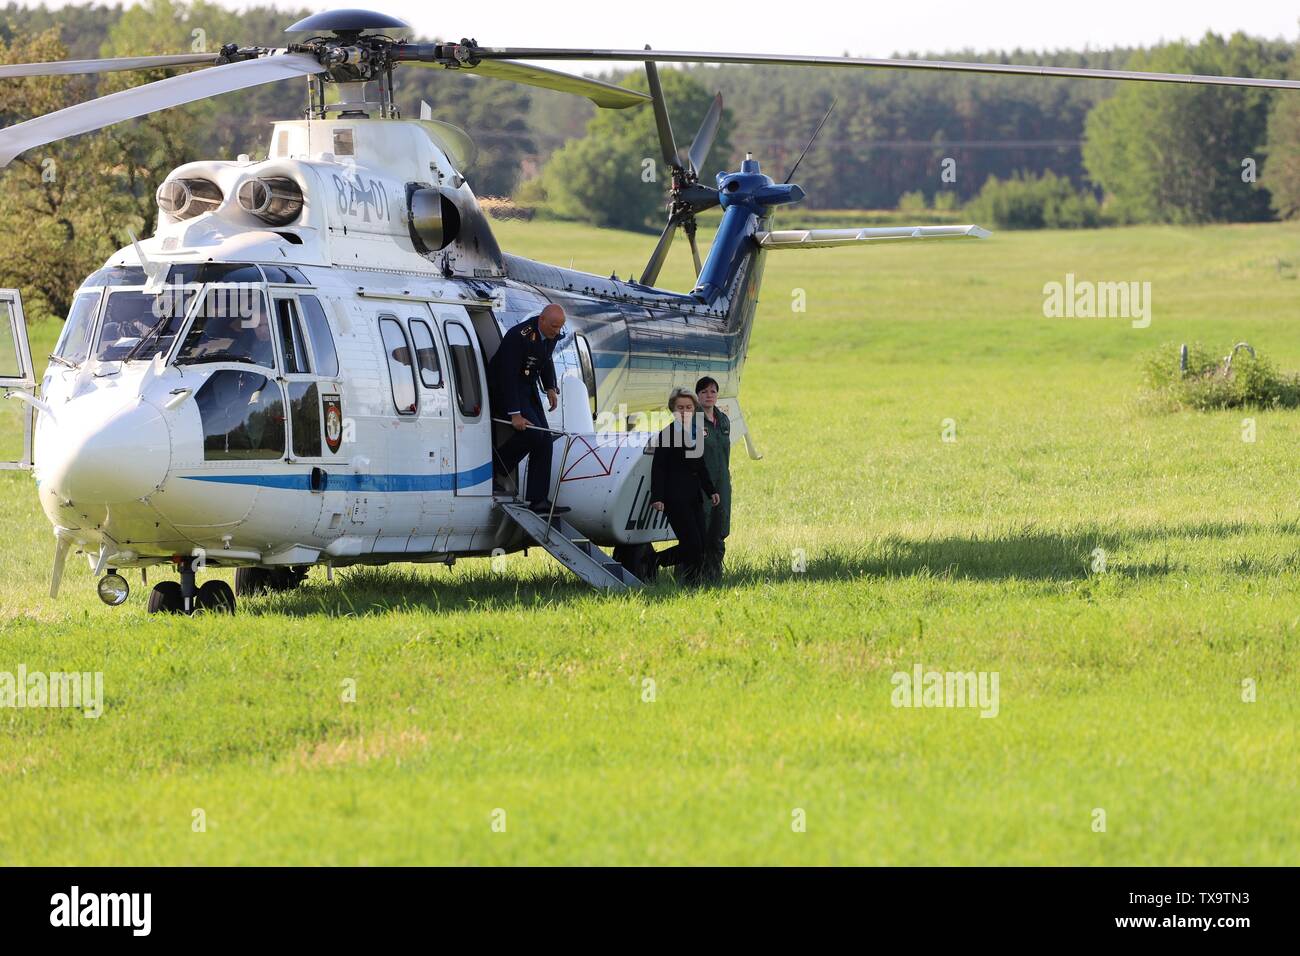 une 24, 2019 - Eurofighter crash in germany  - German Defense Minister Ursula von der Leyen landing at the scene of a crash with a helicopter. Stock Photo